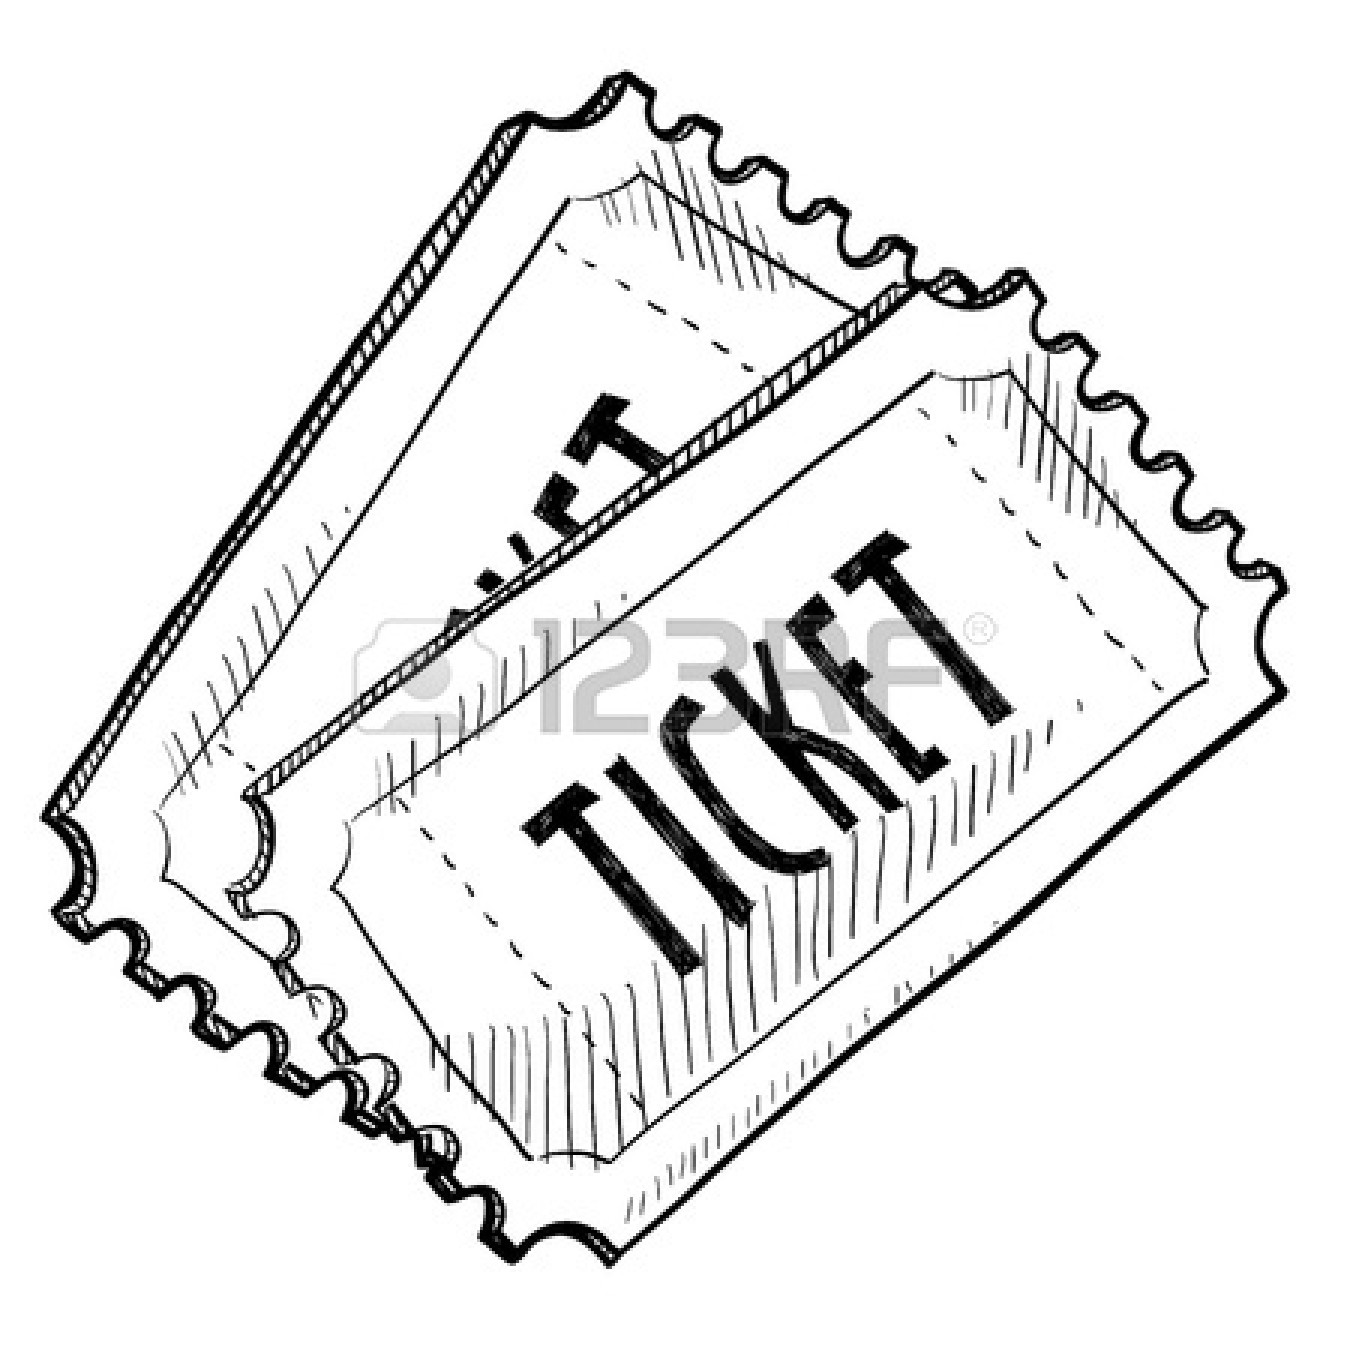 tickets clipart ticketing